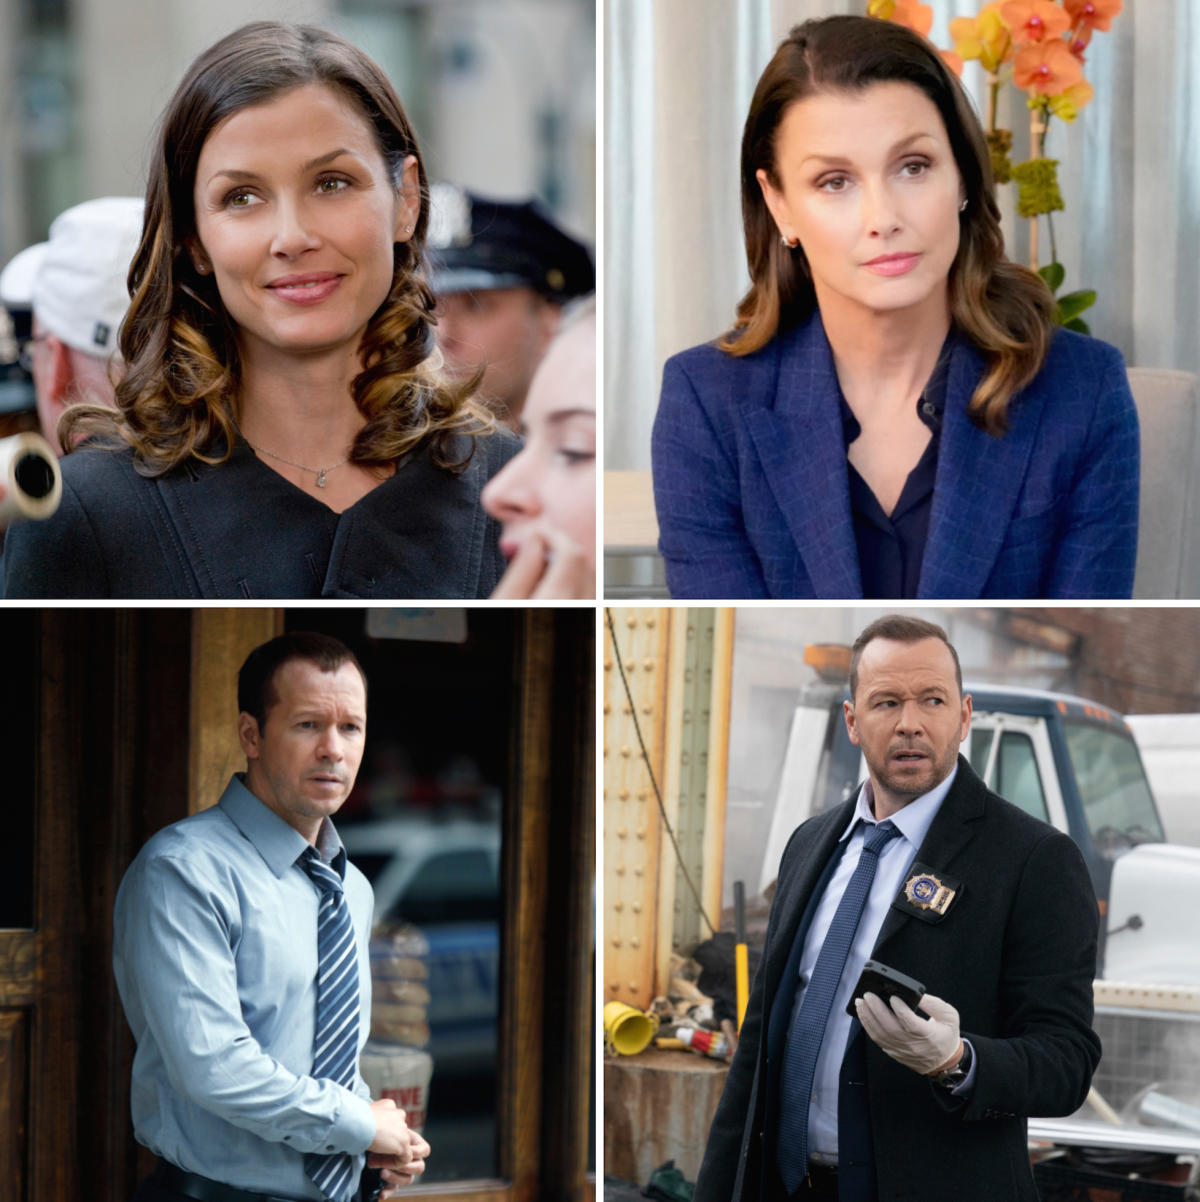 ‘Blue Bloods’ Cast From Season 1 to Now Donnie Wahlberg, Bridget